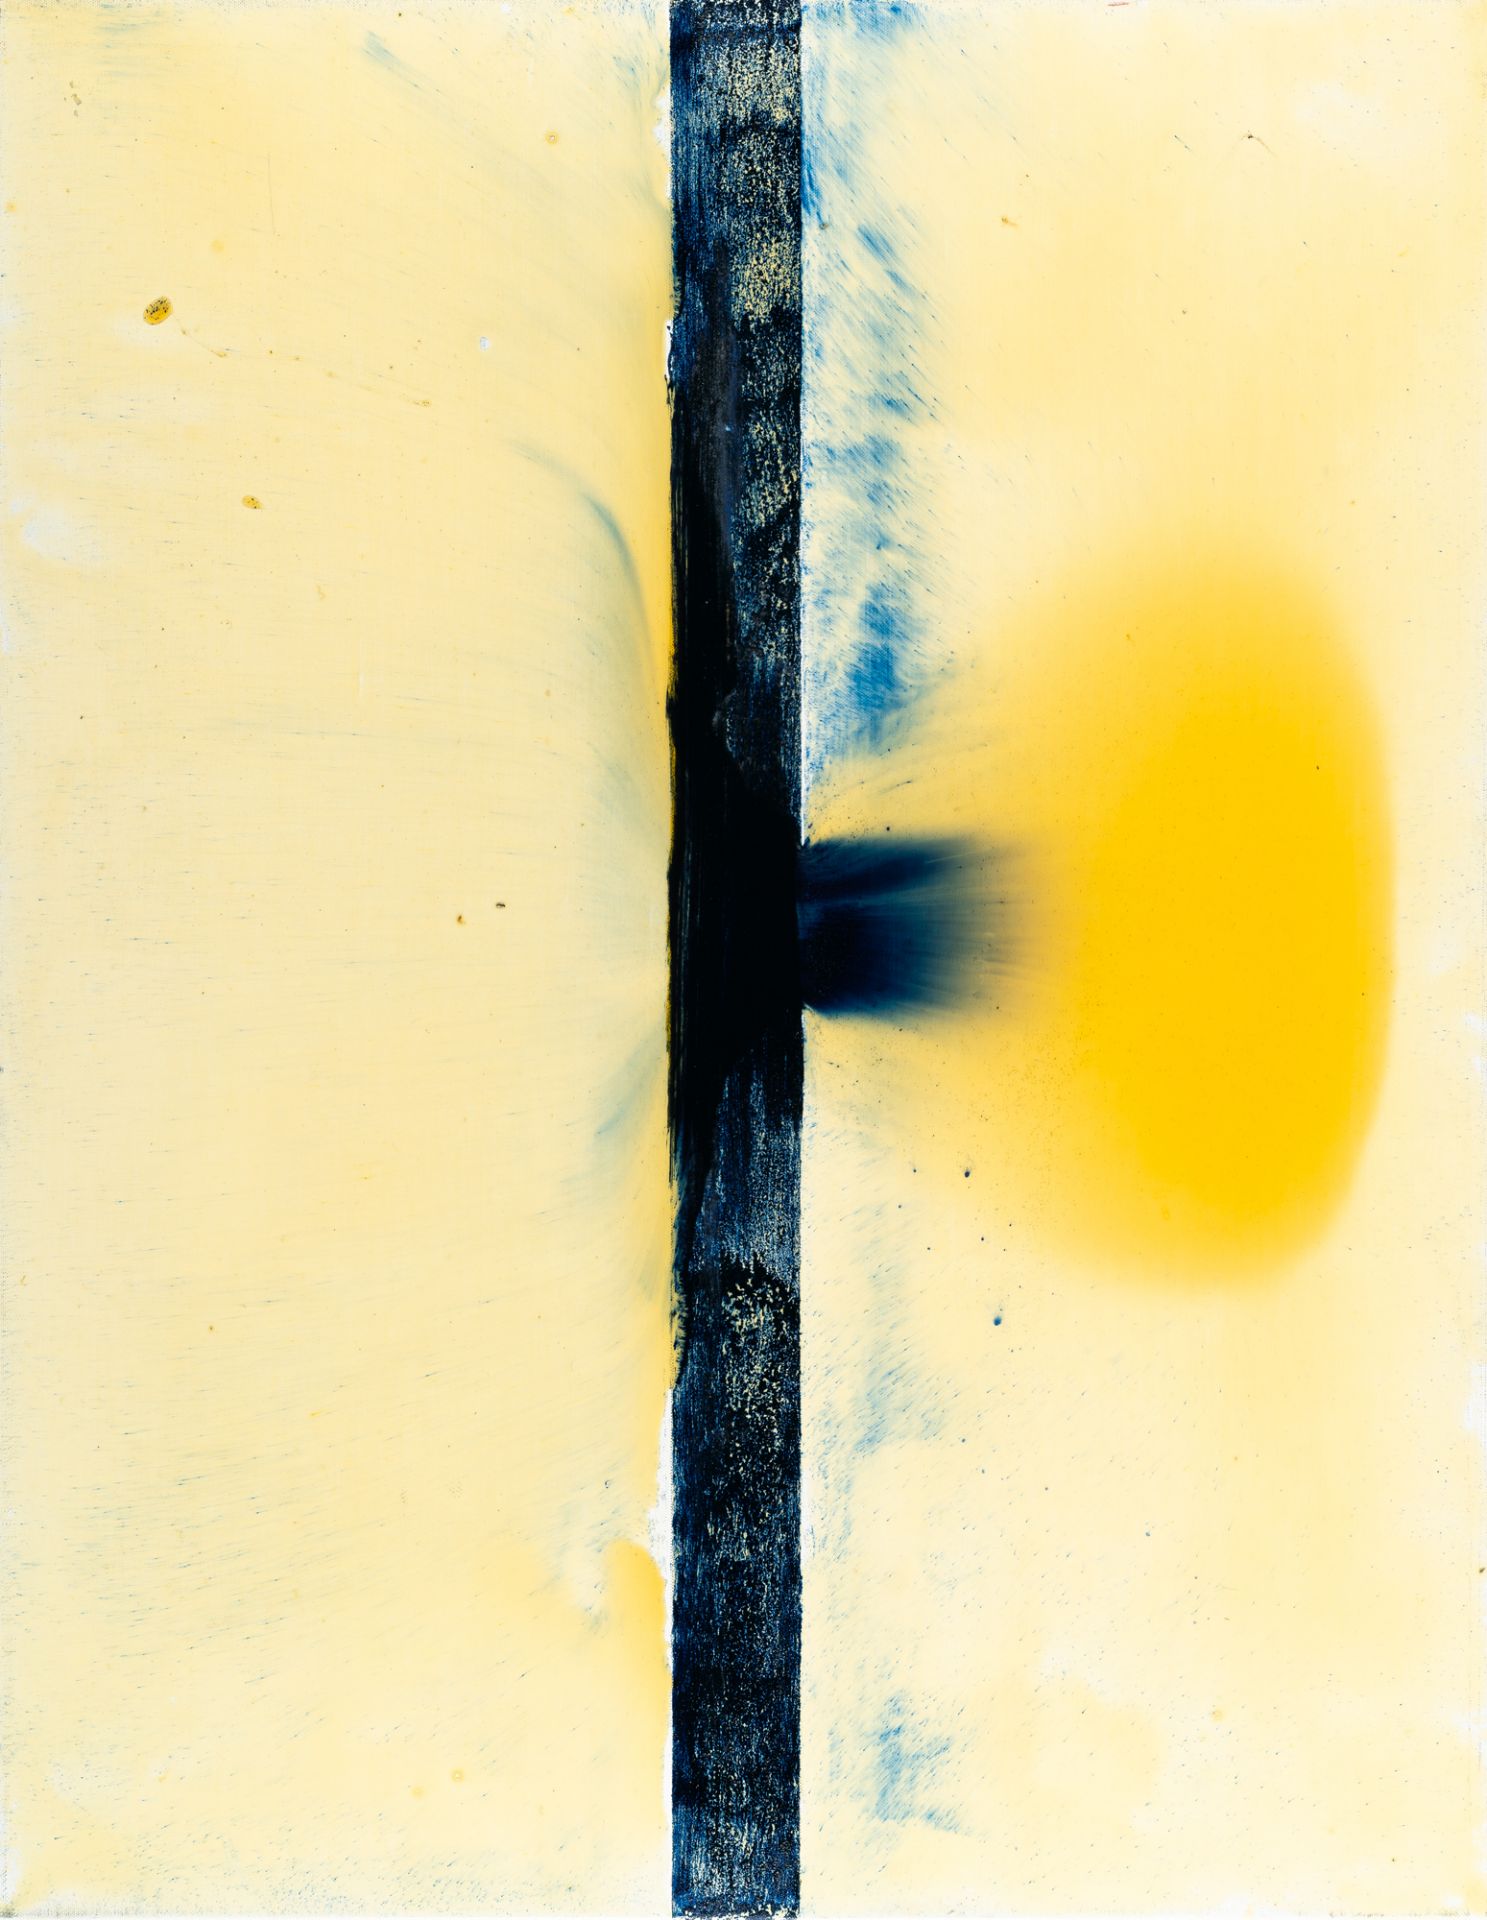 Günther Förg, Untitled.Pigmented lacquer on canvas on an aluminium stretcher. (19)97. Ca. 90 x 70.